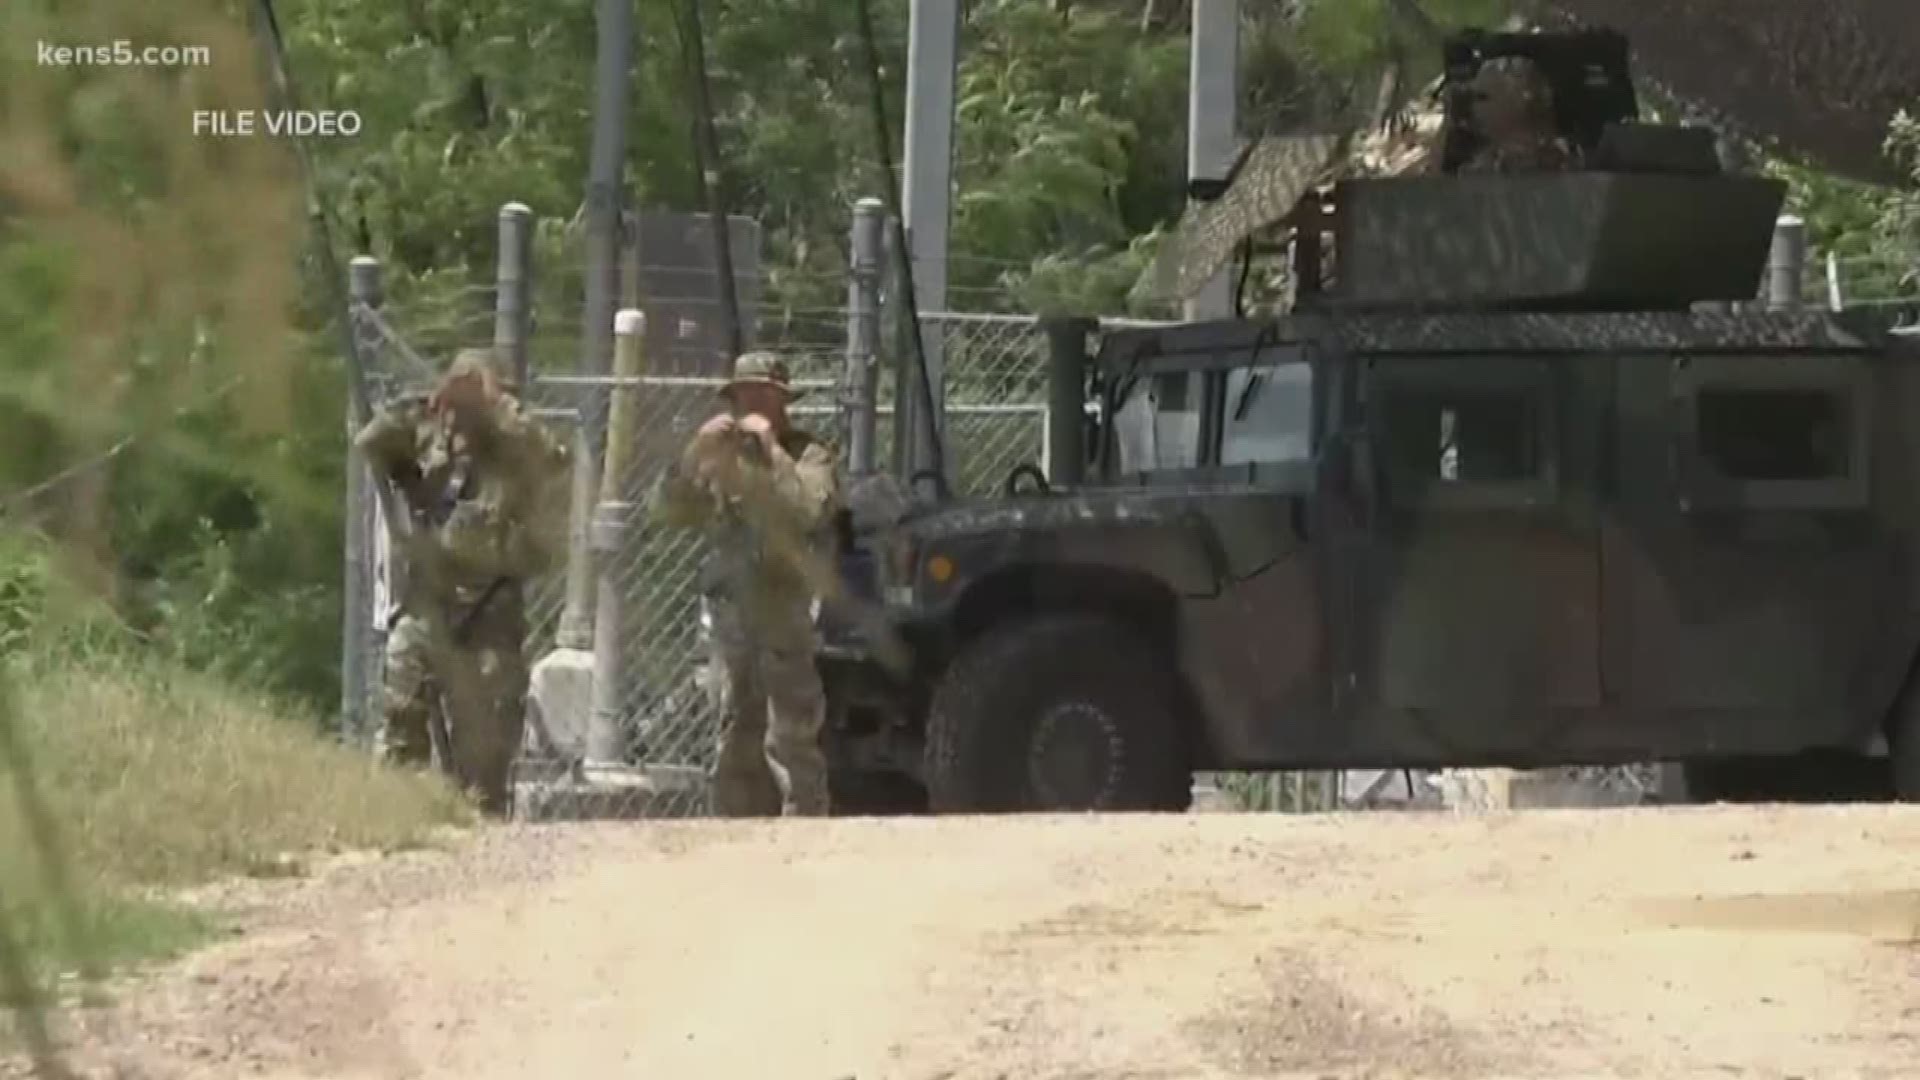 Military reinforcements are making their way to Eagle Pass in response to the arrival of nearly 2,000 people in a migrant caravan in Mexico. Eyewitness News border reporter Oscar Margain is live in Eagle Pass where local authorities are expecting troops to set up camp.